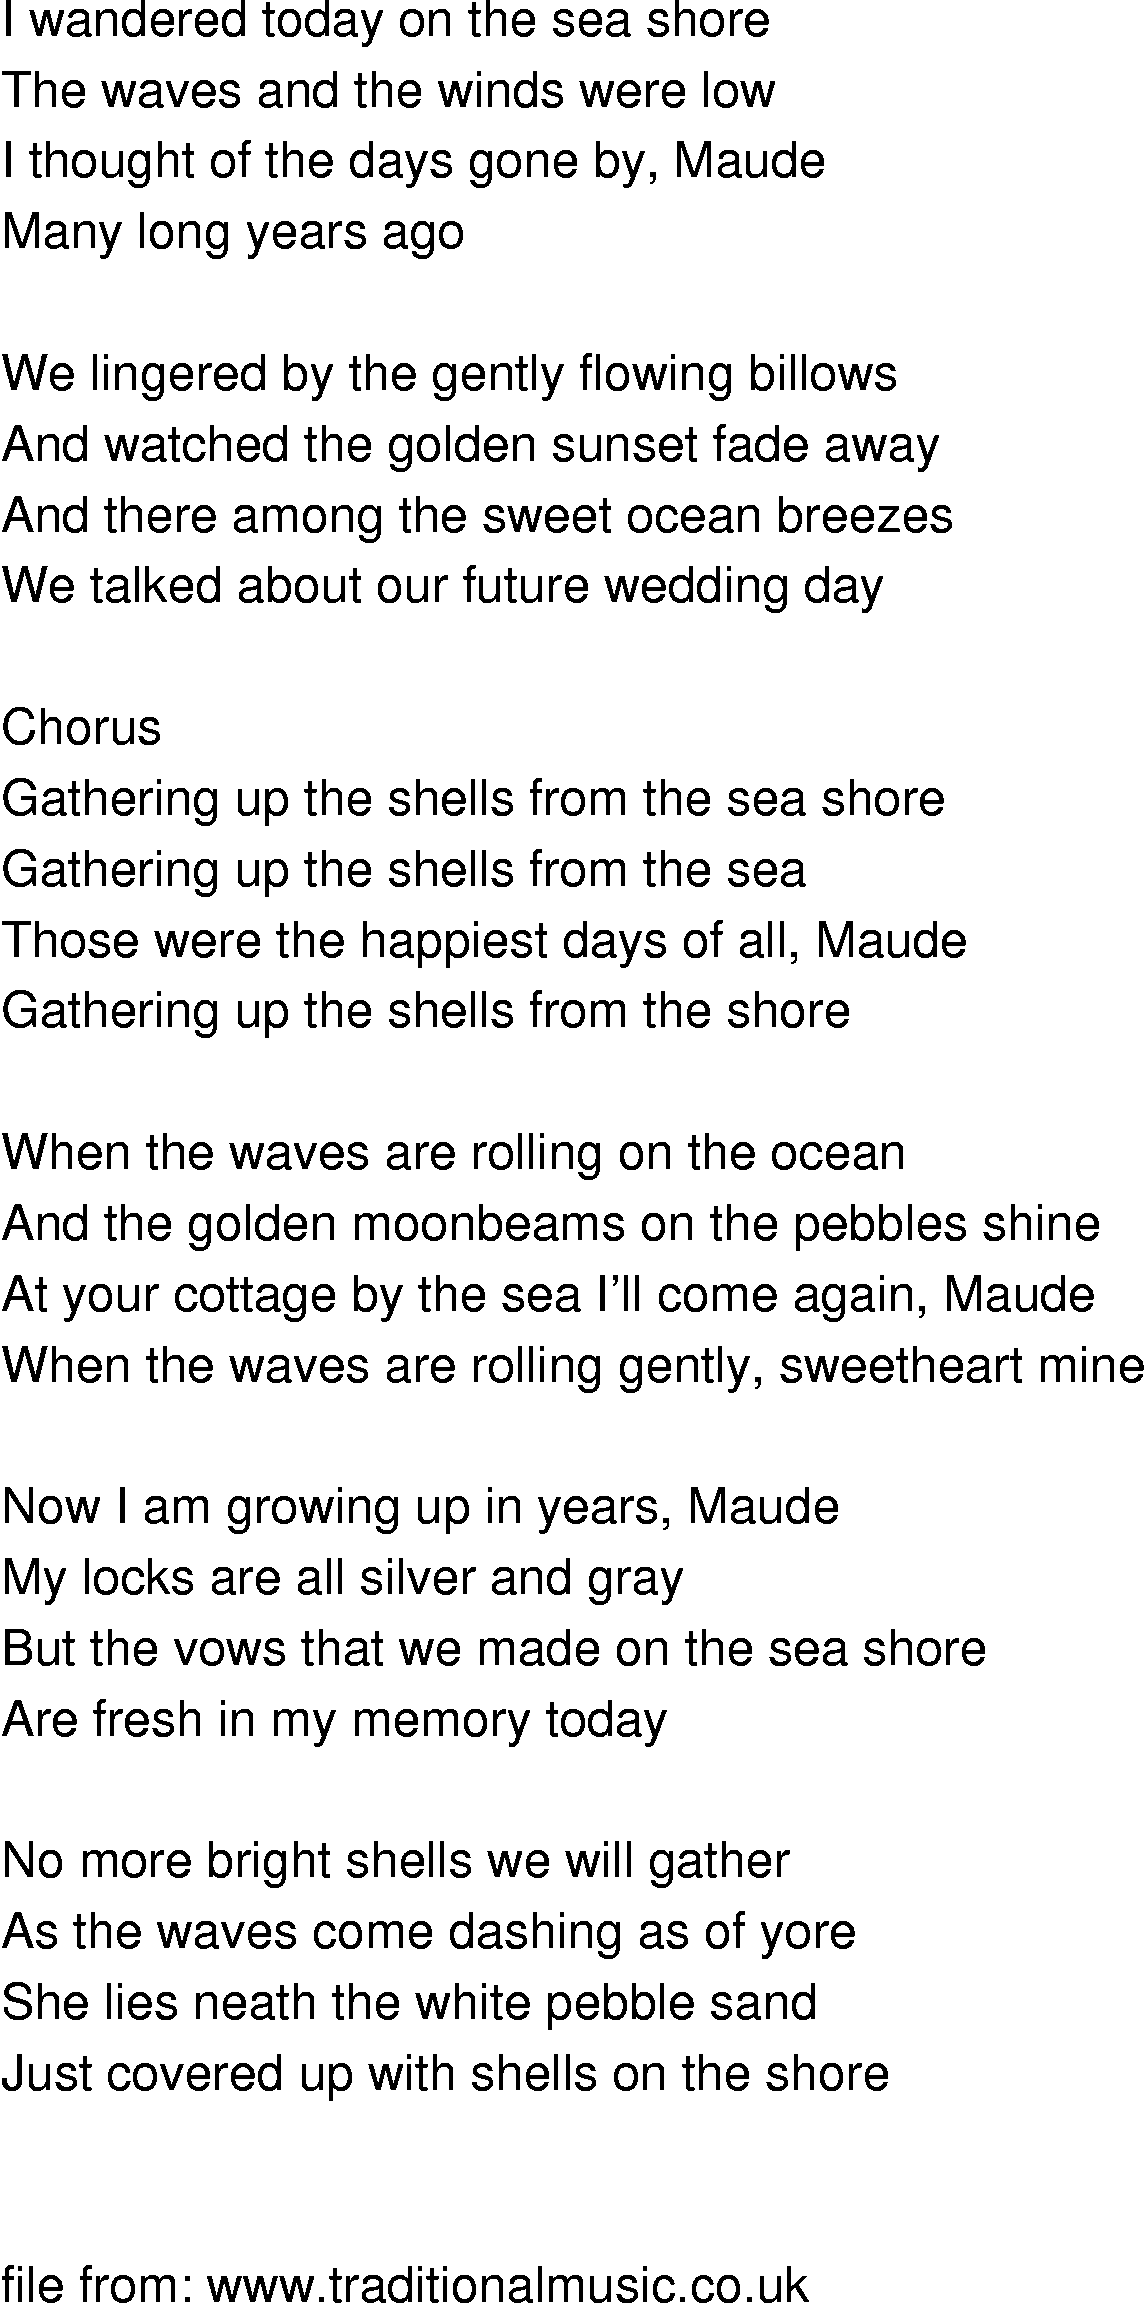 Old-Time (oldtimey) Song Lyrics - gathering up the shells from the seashore